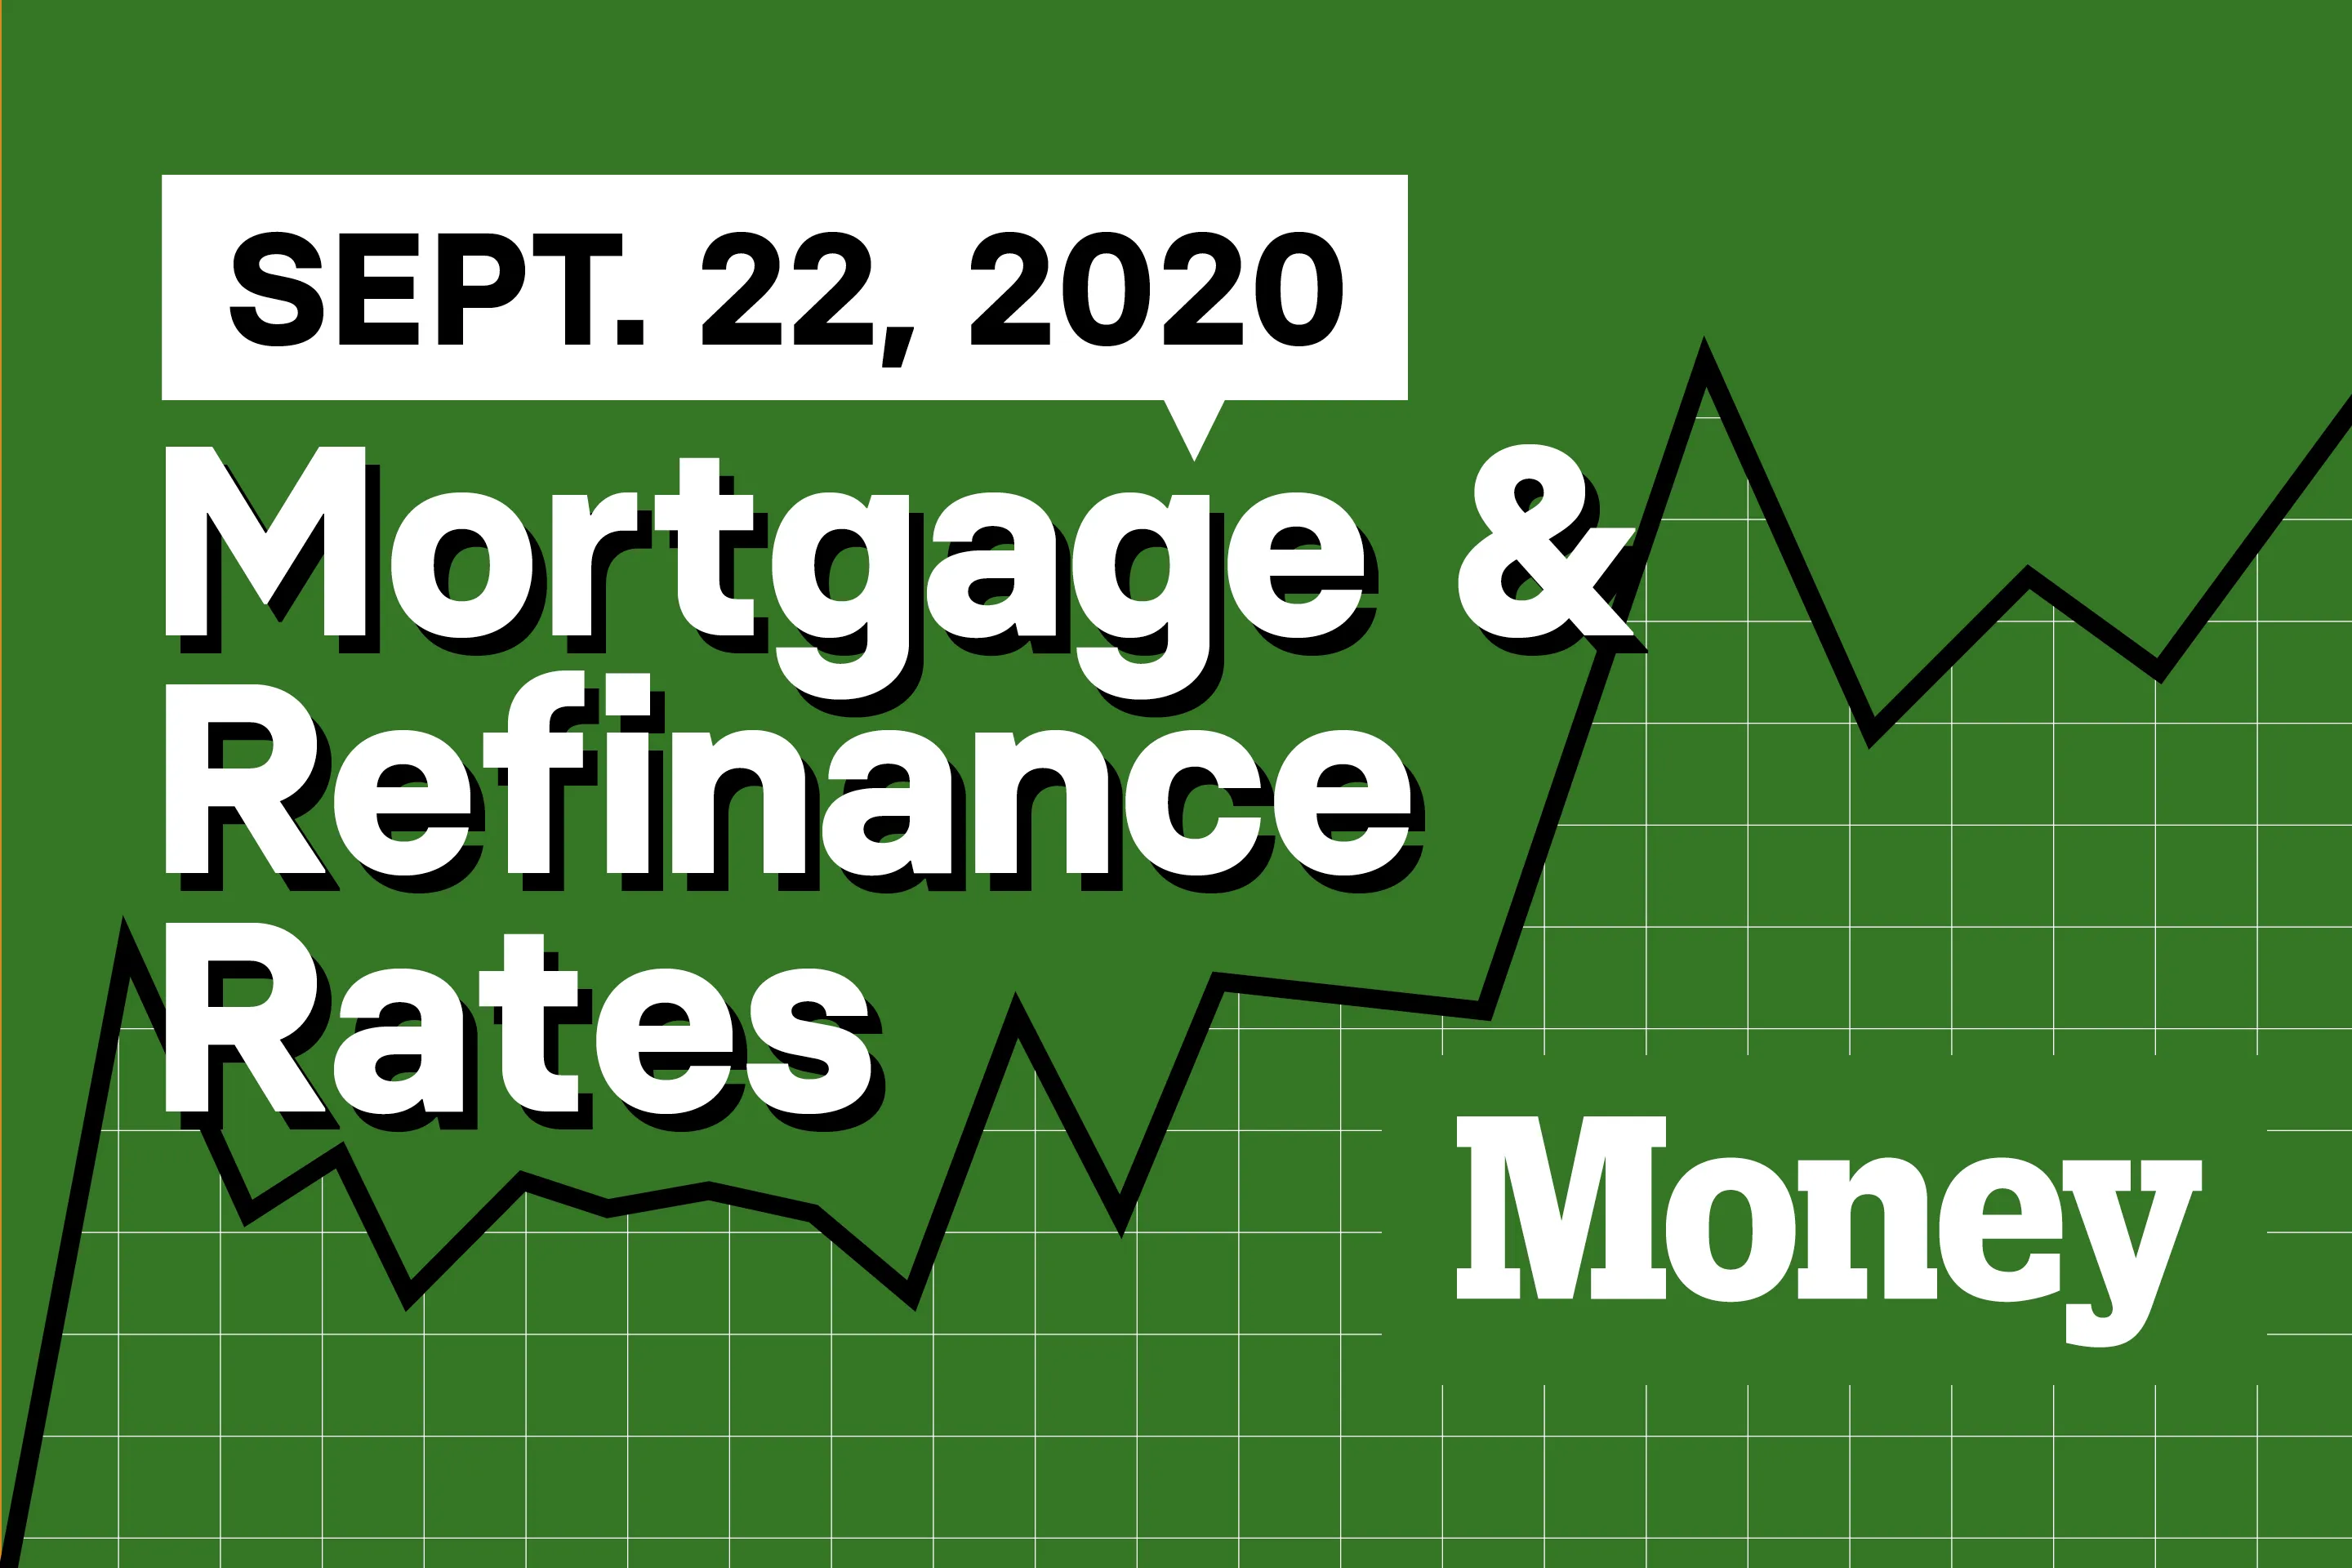 Here Are Today's Best Mortgage & Refinance Rates for September 22, 2020